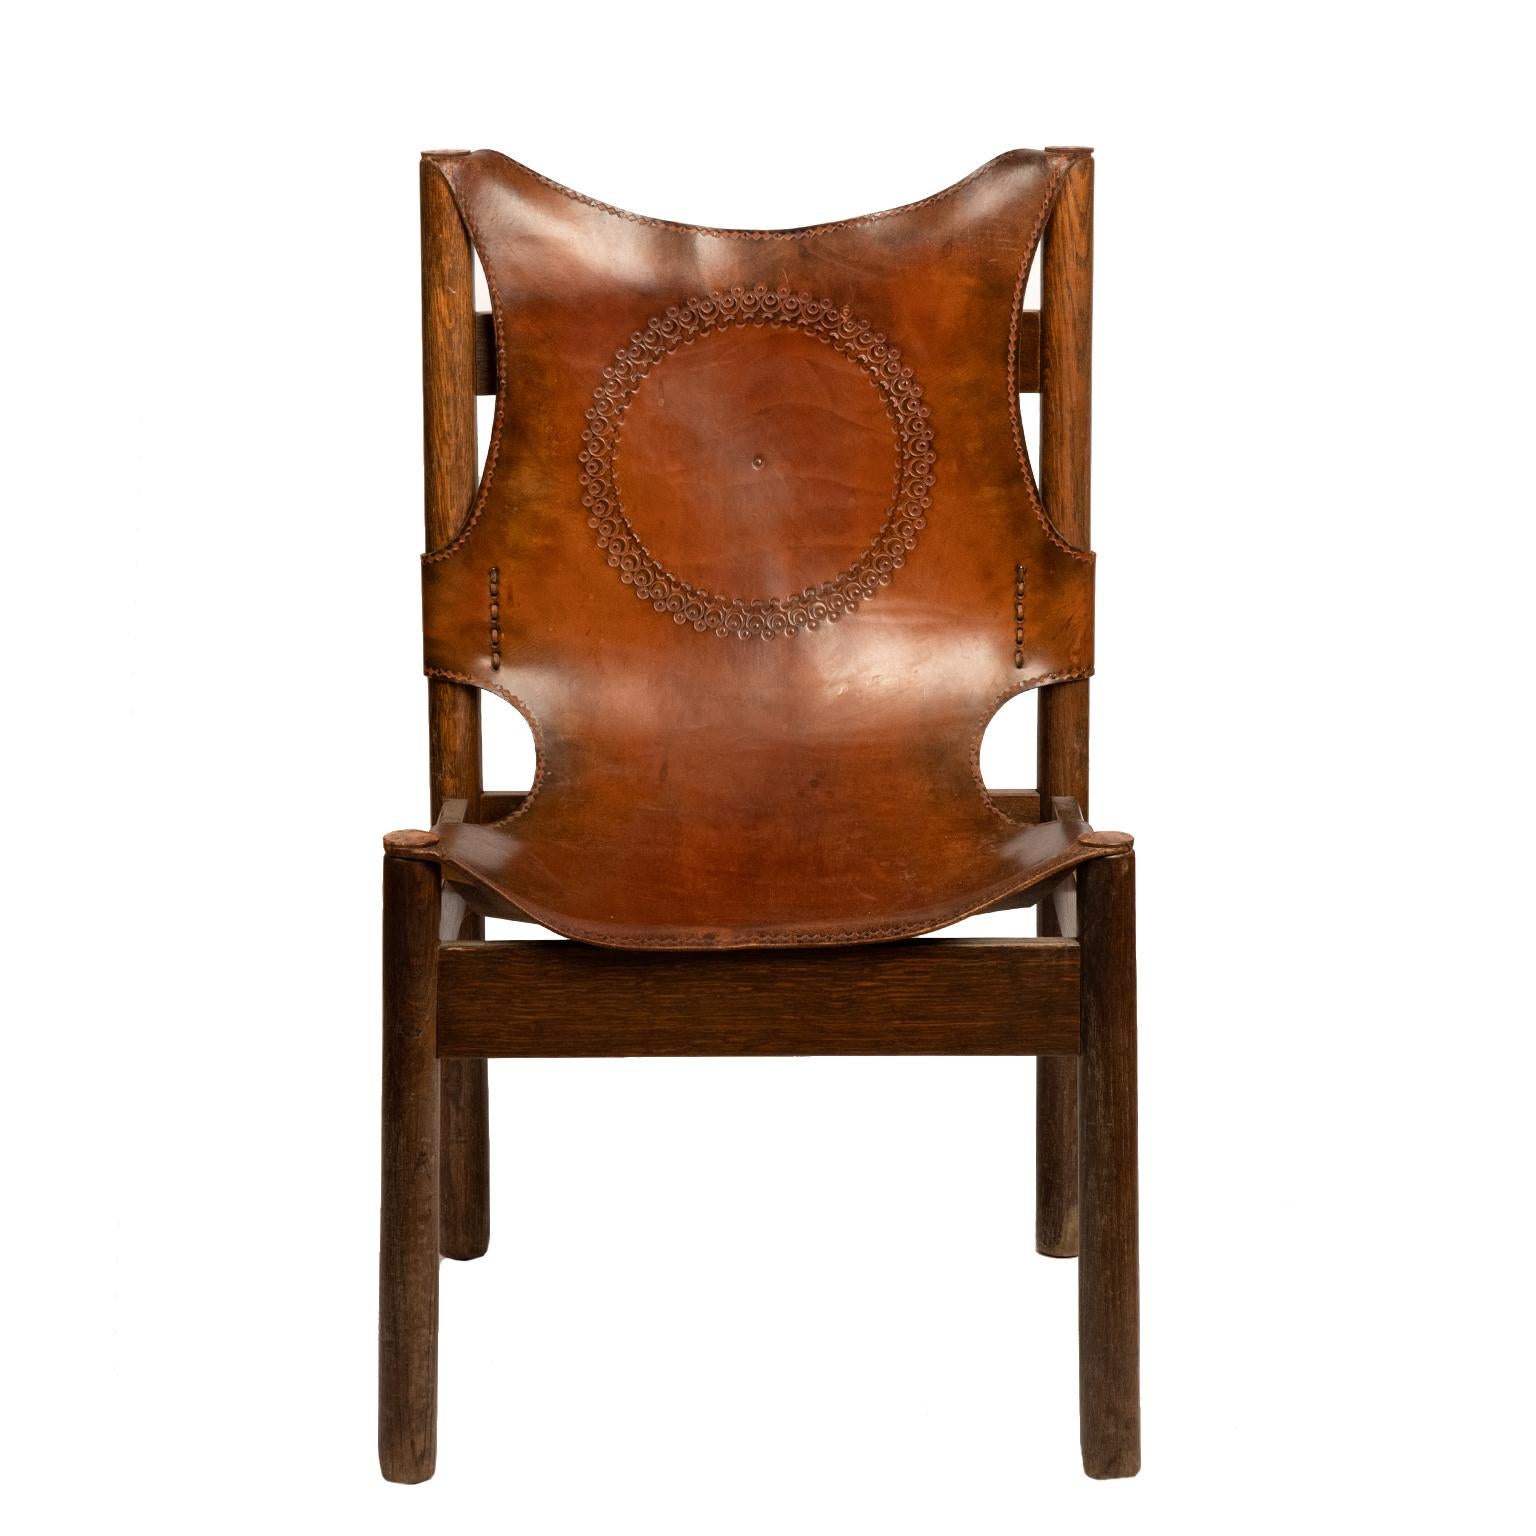 This gorgeous pair of deep cognac brown leather Spanish chairs are rustic yet stylish.
A thick patinated leather with a centre embossed medallion is stitched around a solid dark hardwood frame. They are both stable and can be used at your leisure.